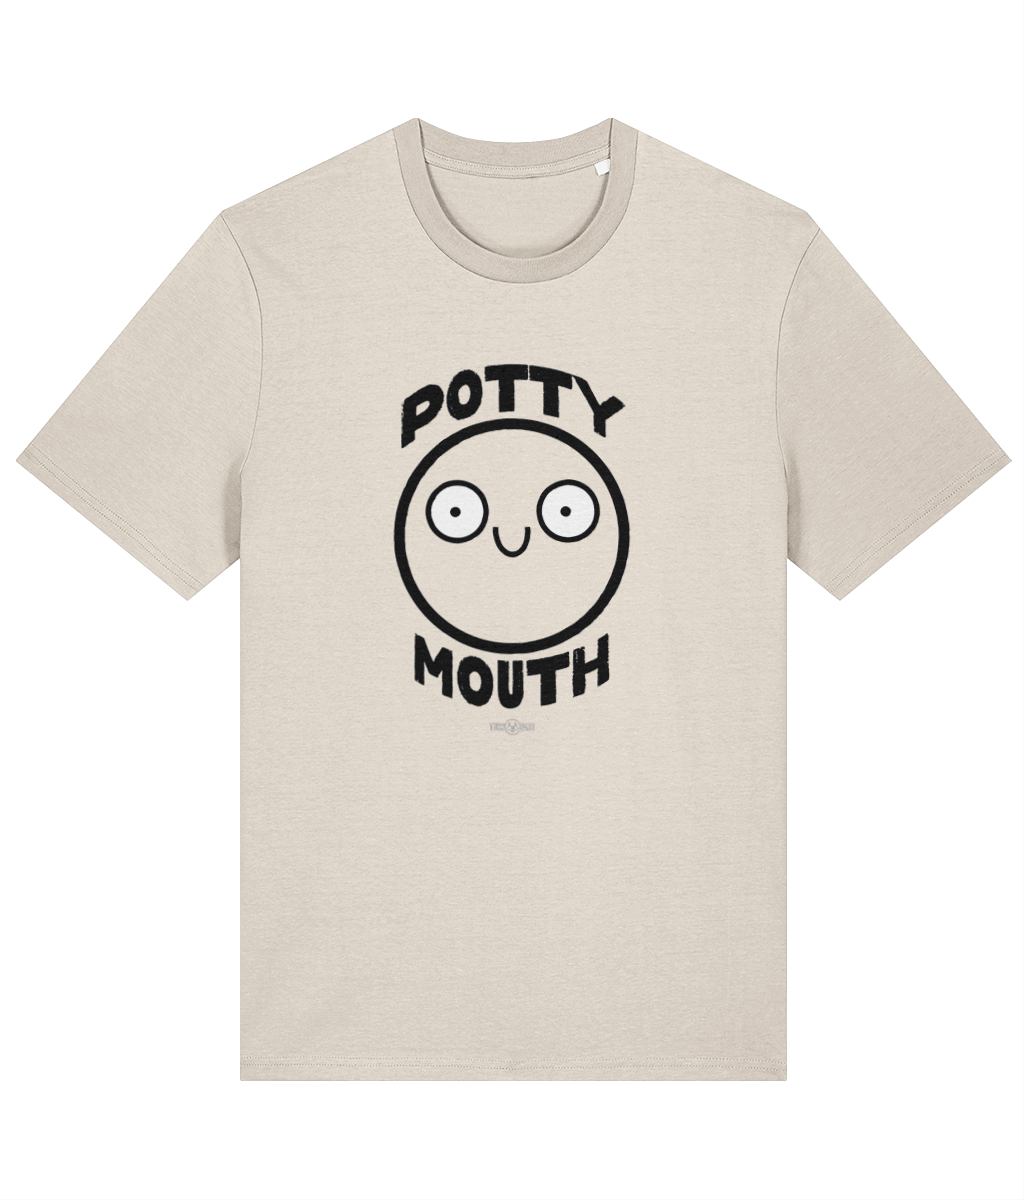 Potty Mouth - Tussface T-shirt